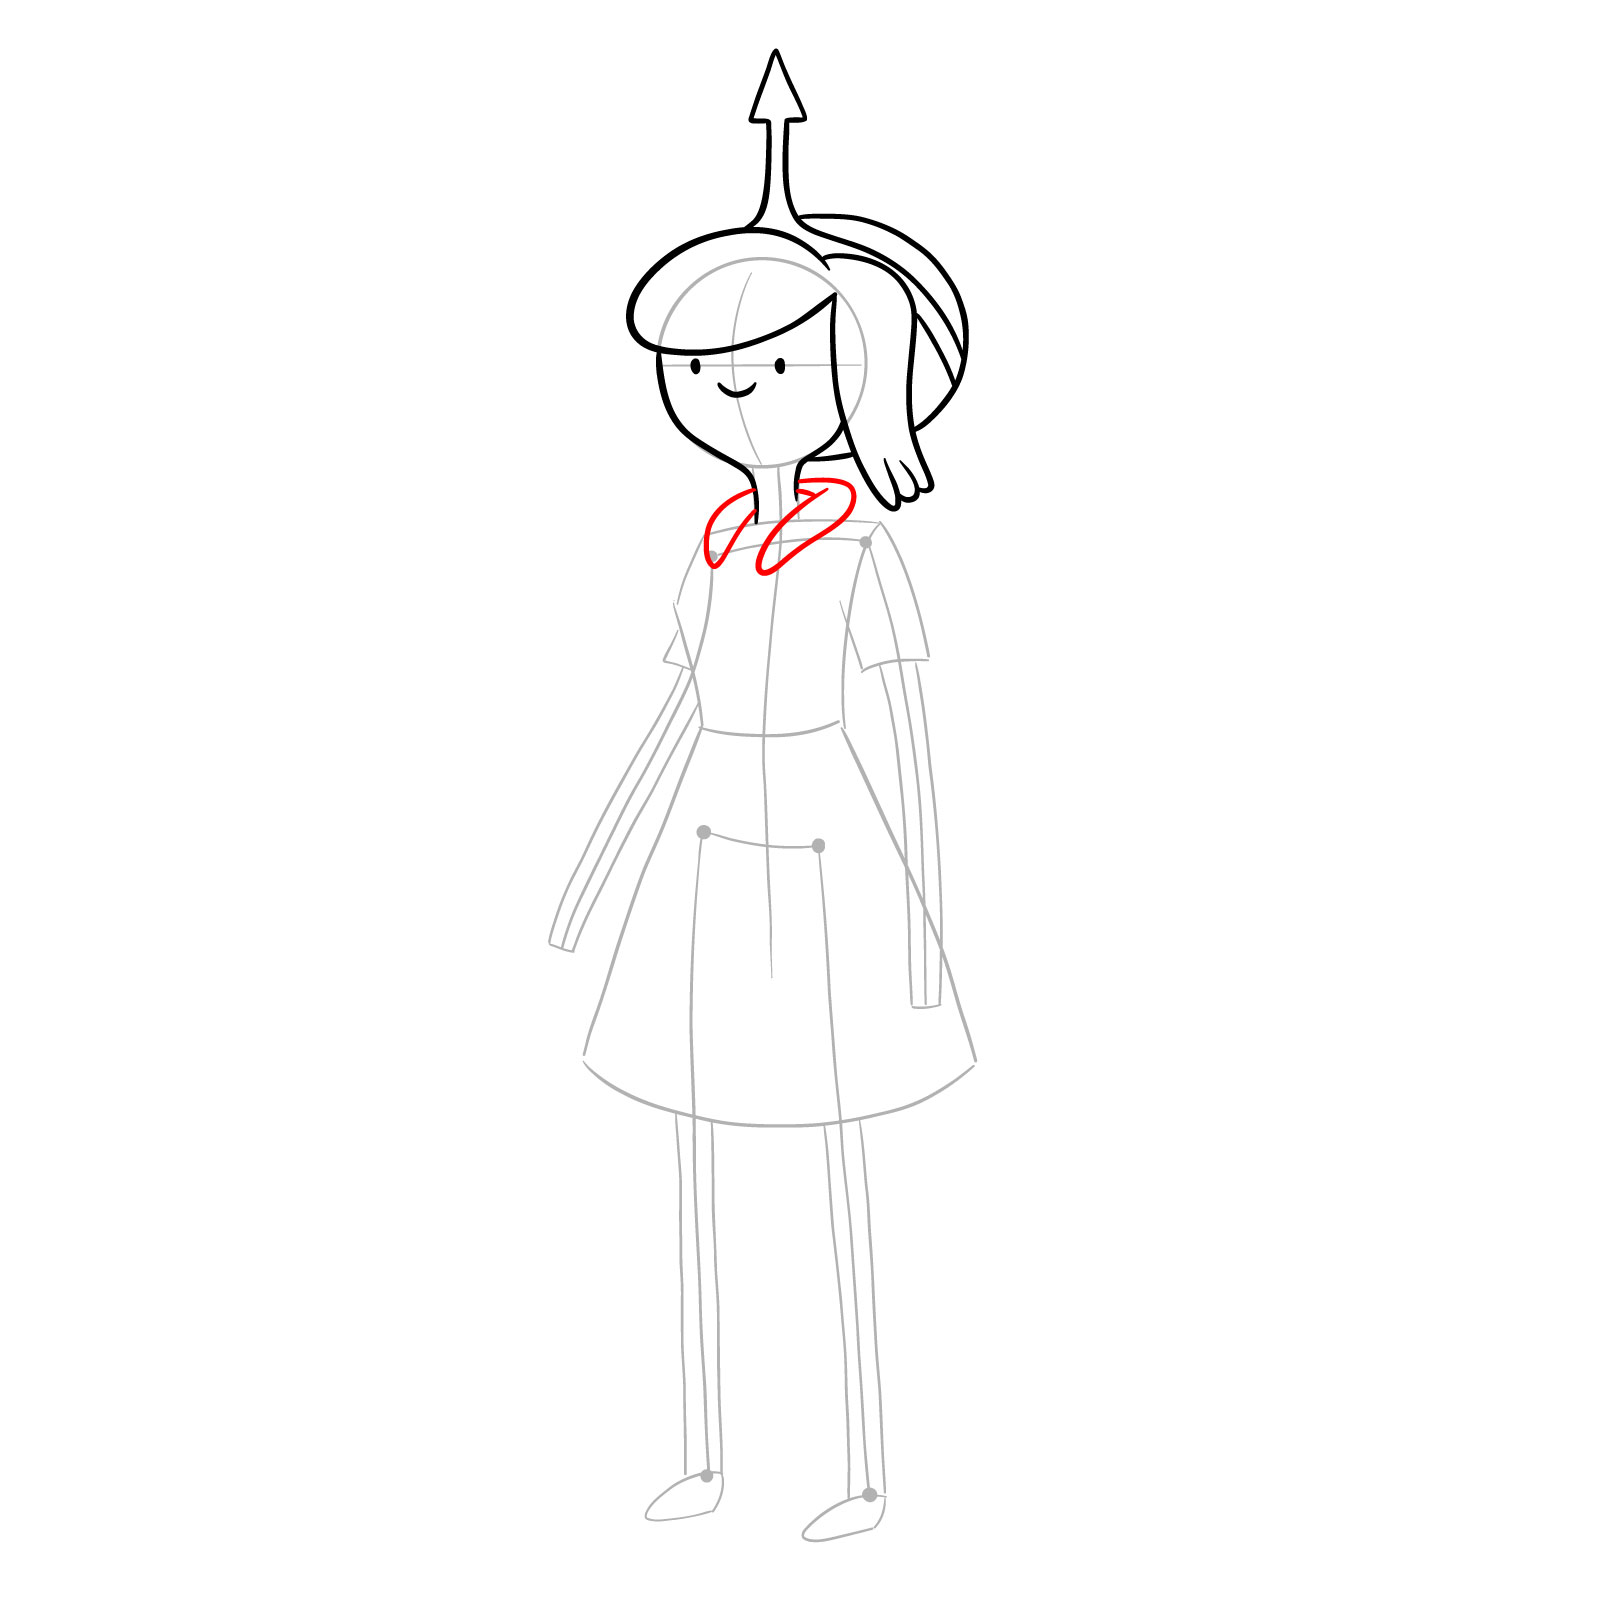 How to draw Princess Chewypaste from Adventure Time - step 10